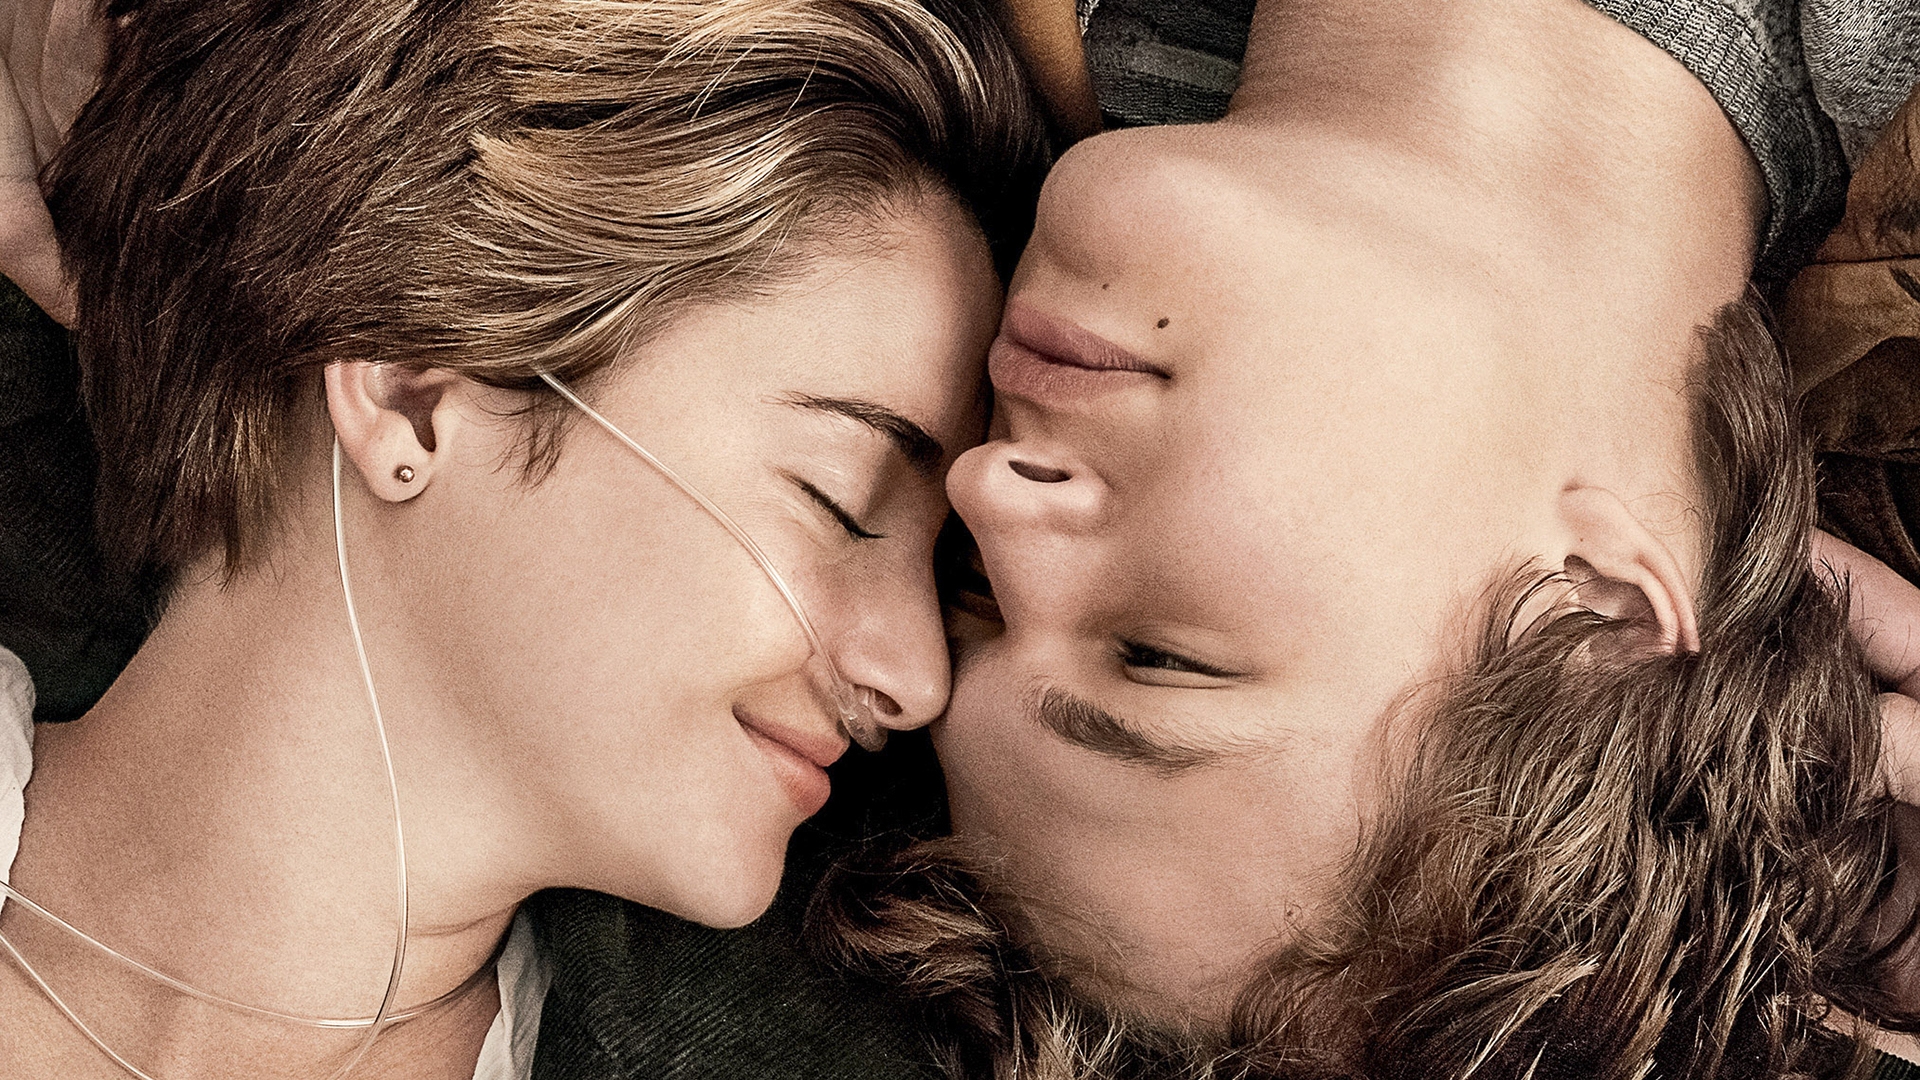 The Fault in Our Stars for 1920 x 1080 HDTV 1080p resolution